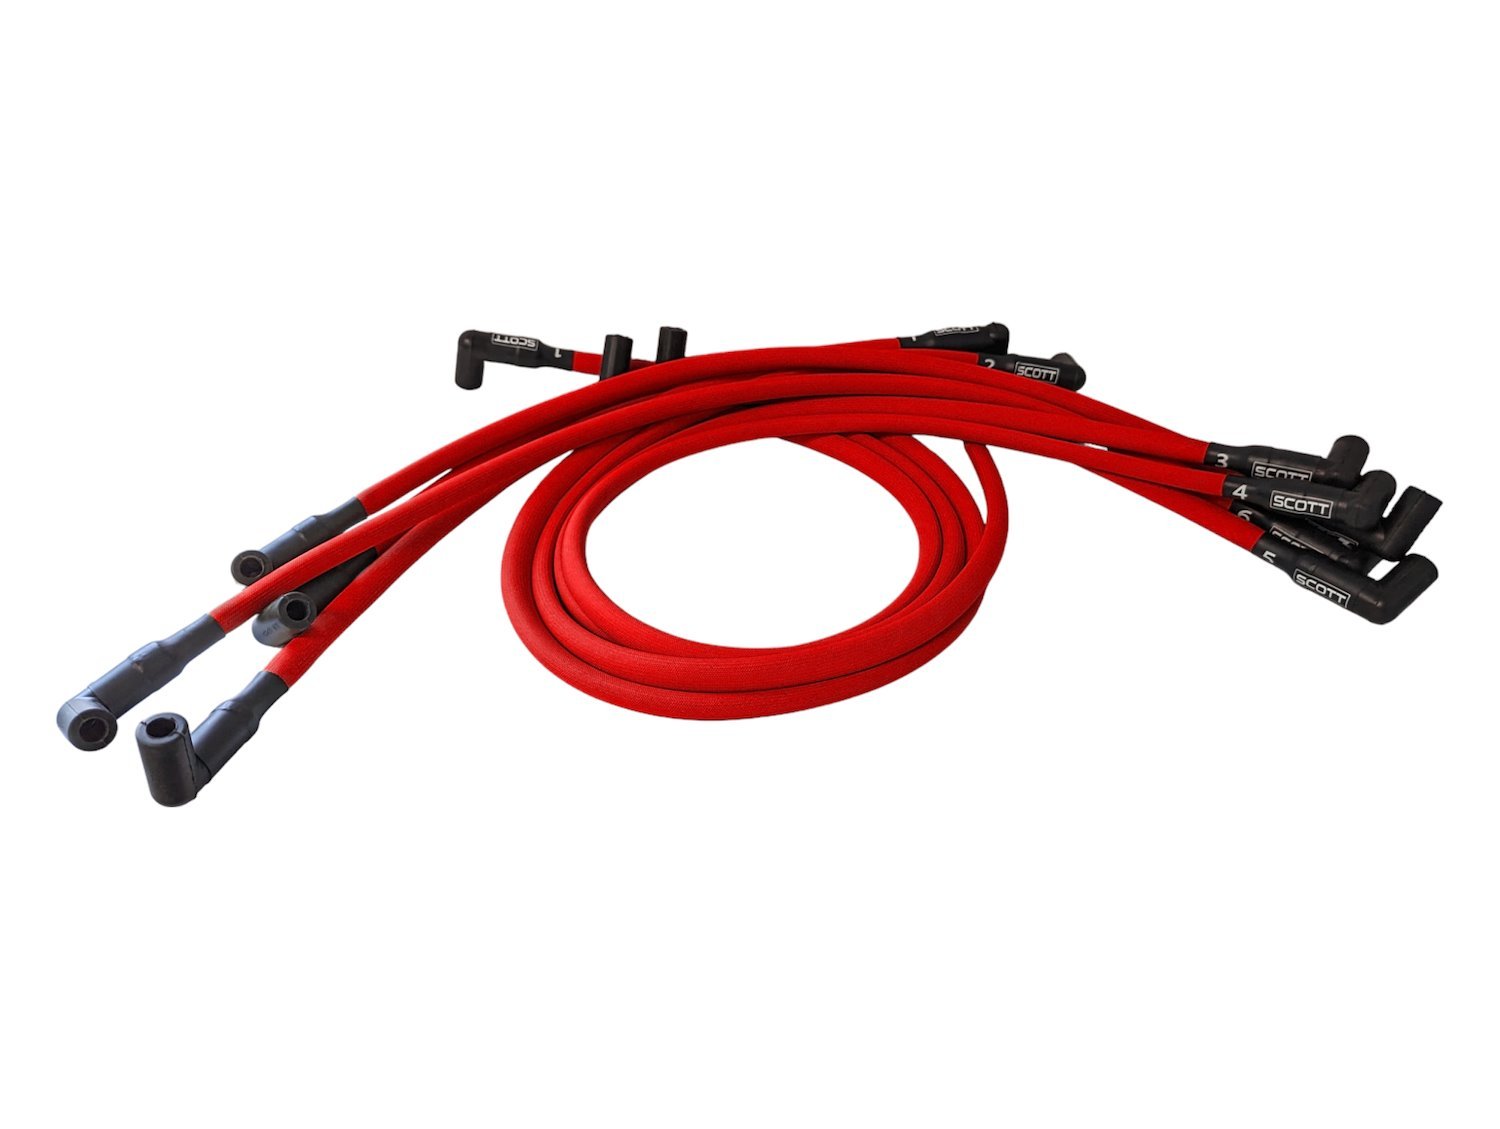 SPW-PS-437-2 High-Performance Fiberglass-Oversleeved Spark Plug Wire Set for Small Block Chevy, Over & Under [Red]